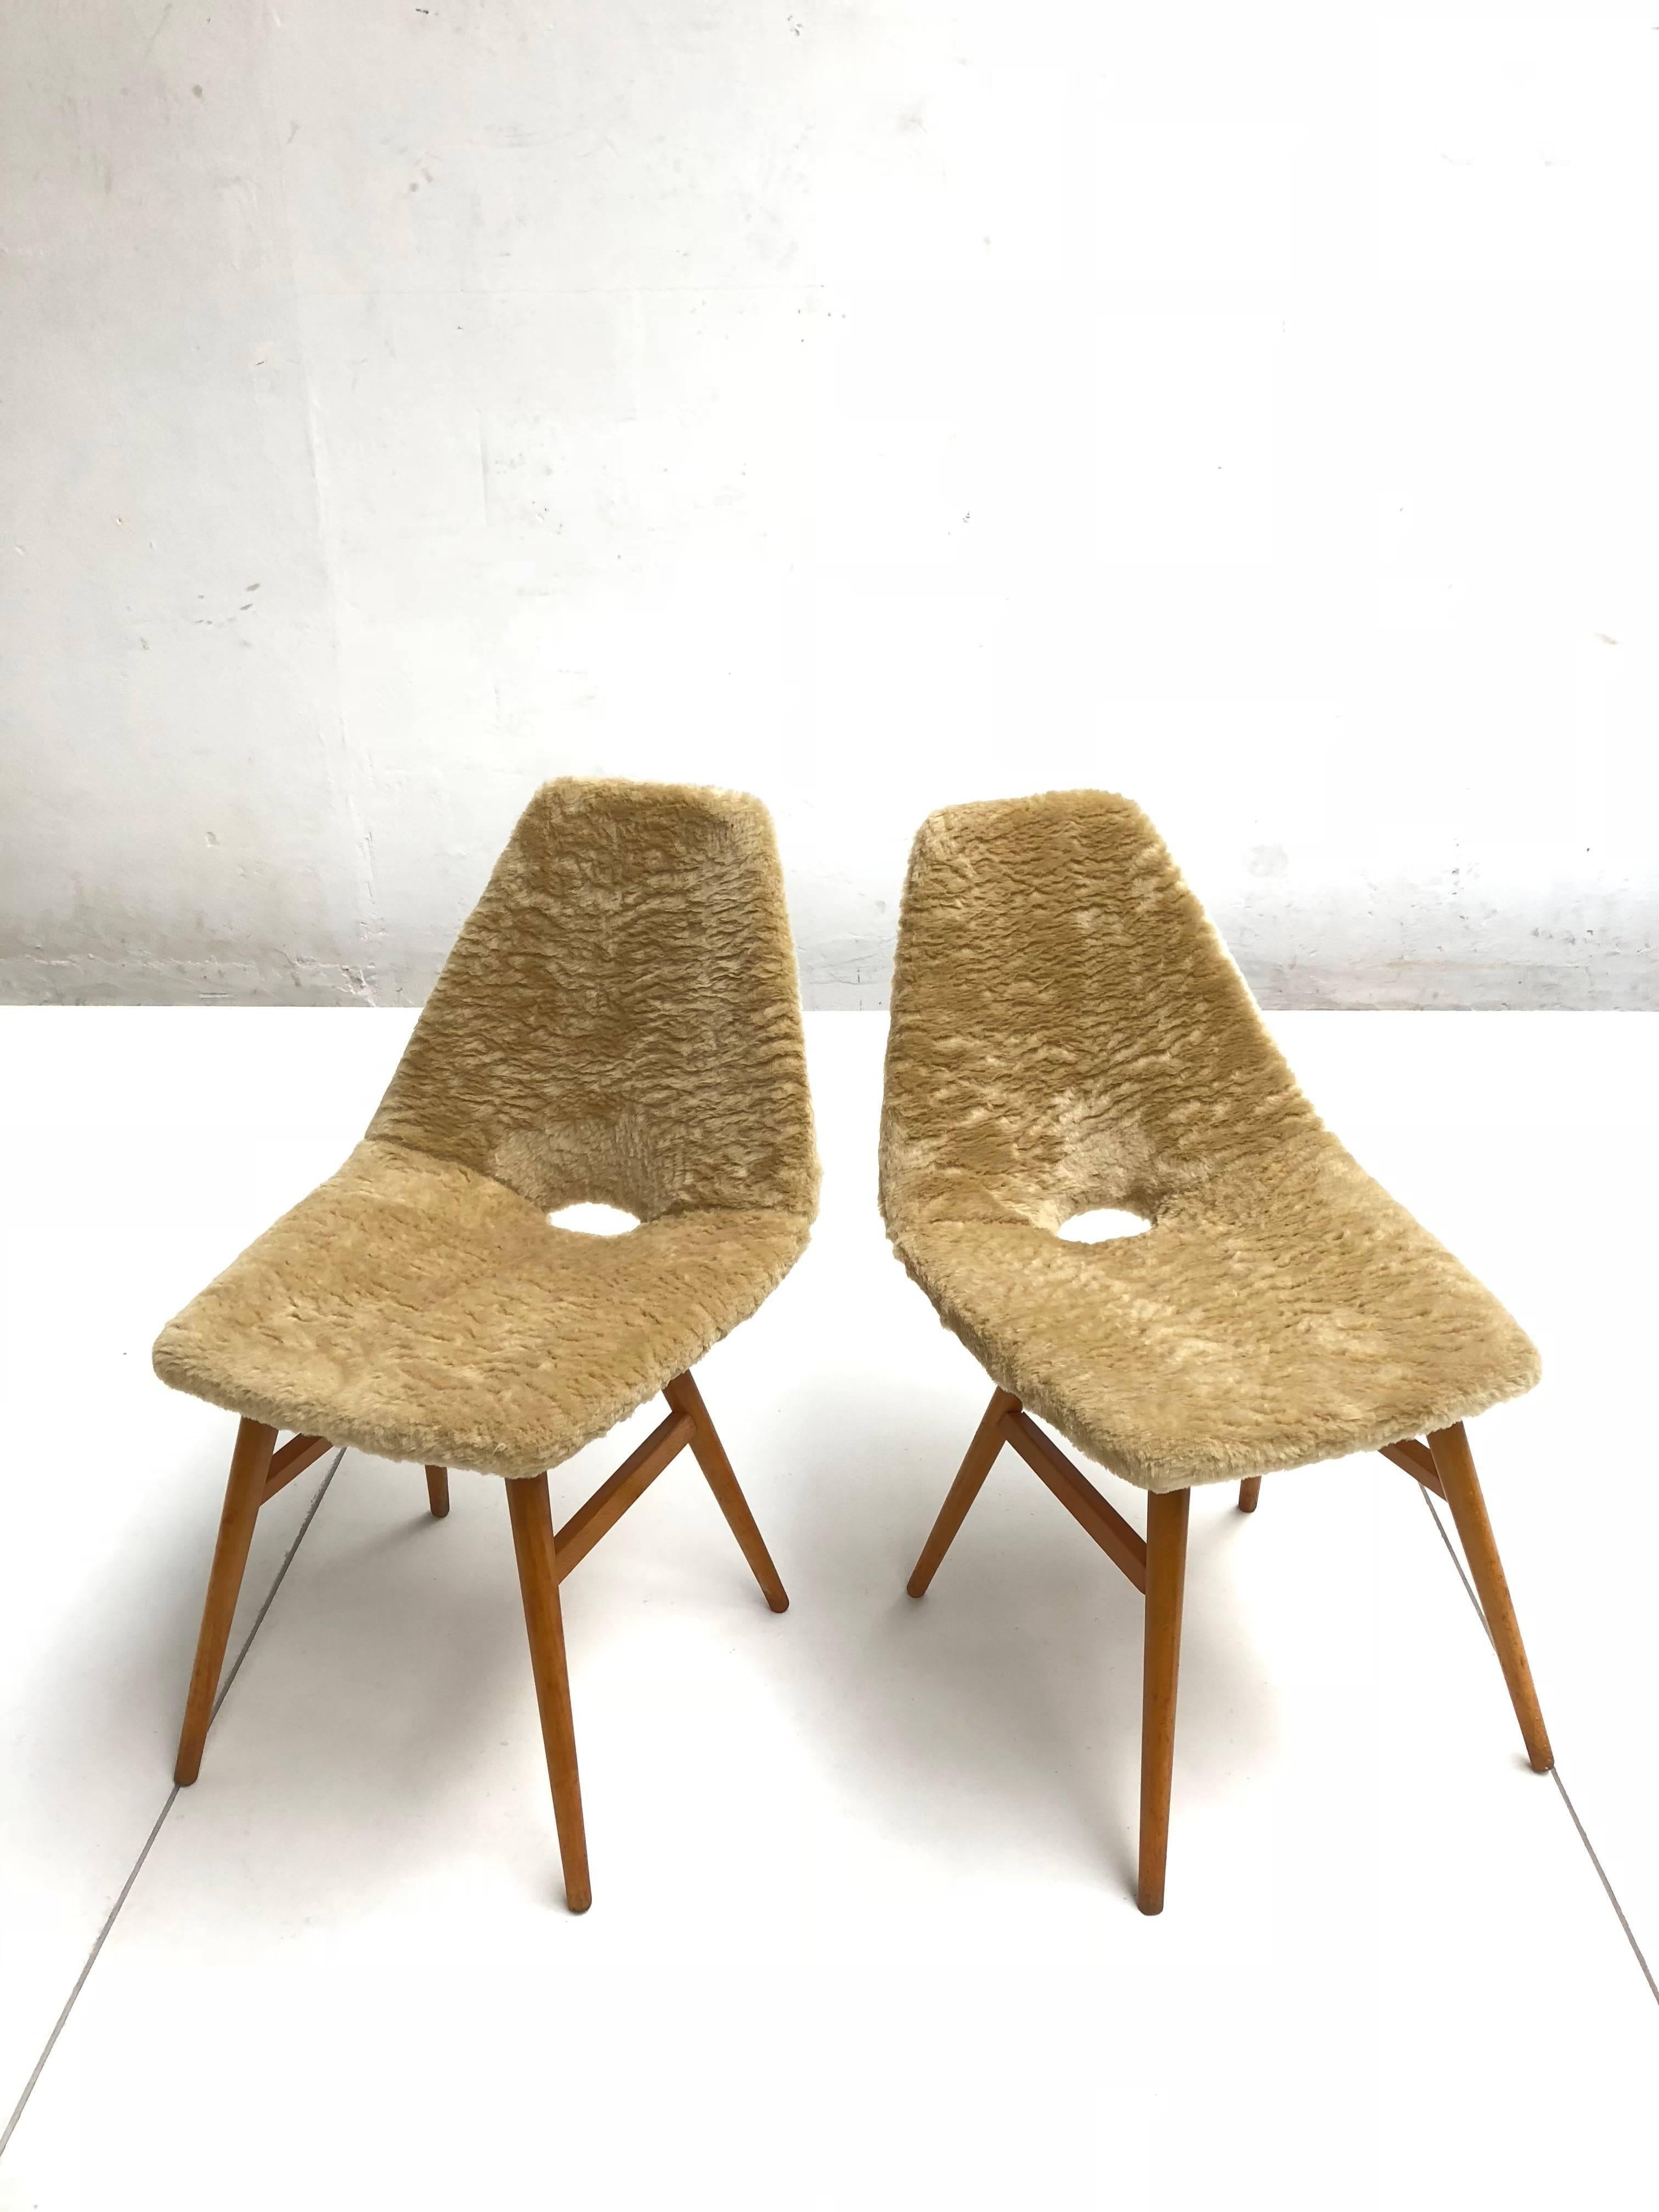 Hungarian Pair of Side Chairs by Judit Burian & Erika Szek Hungary, circa 1959 For Sale